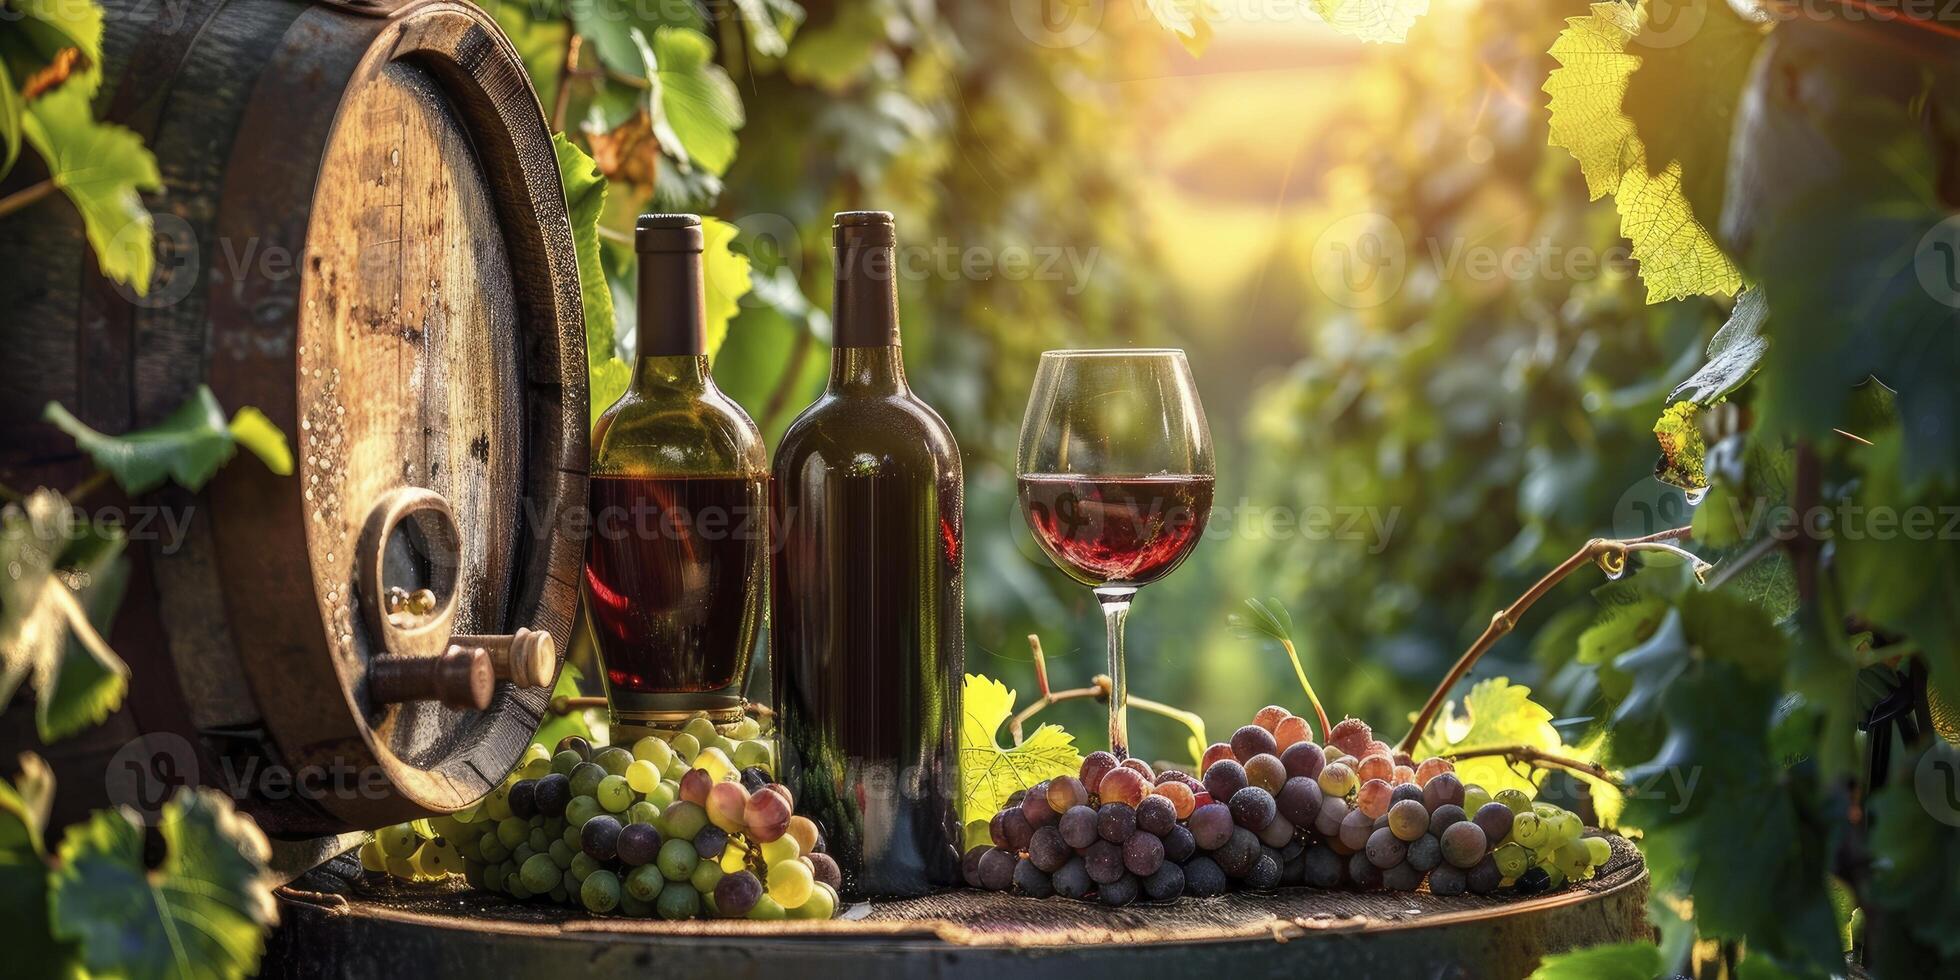 Scenic Countryside Delight, Bottles and Wine Glasses Arranged Amidst Lush Grape Vines and Wooden Barrels, Evoking the Essence of Wine Country Tranquility. photo